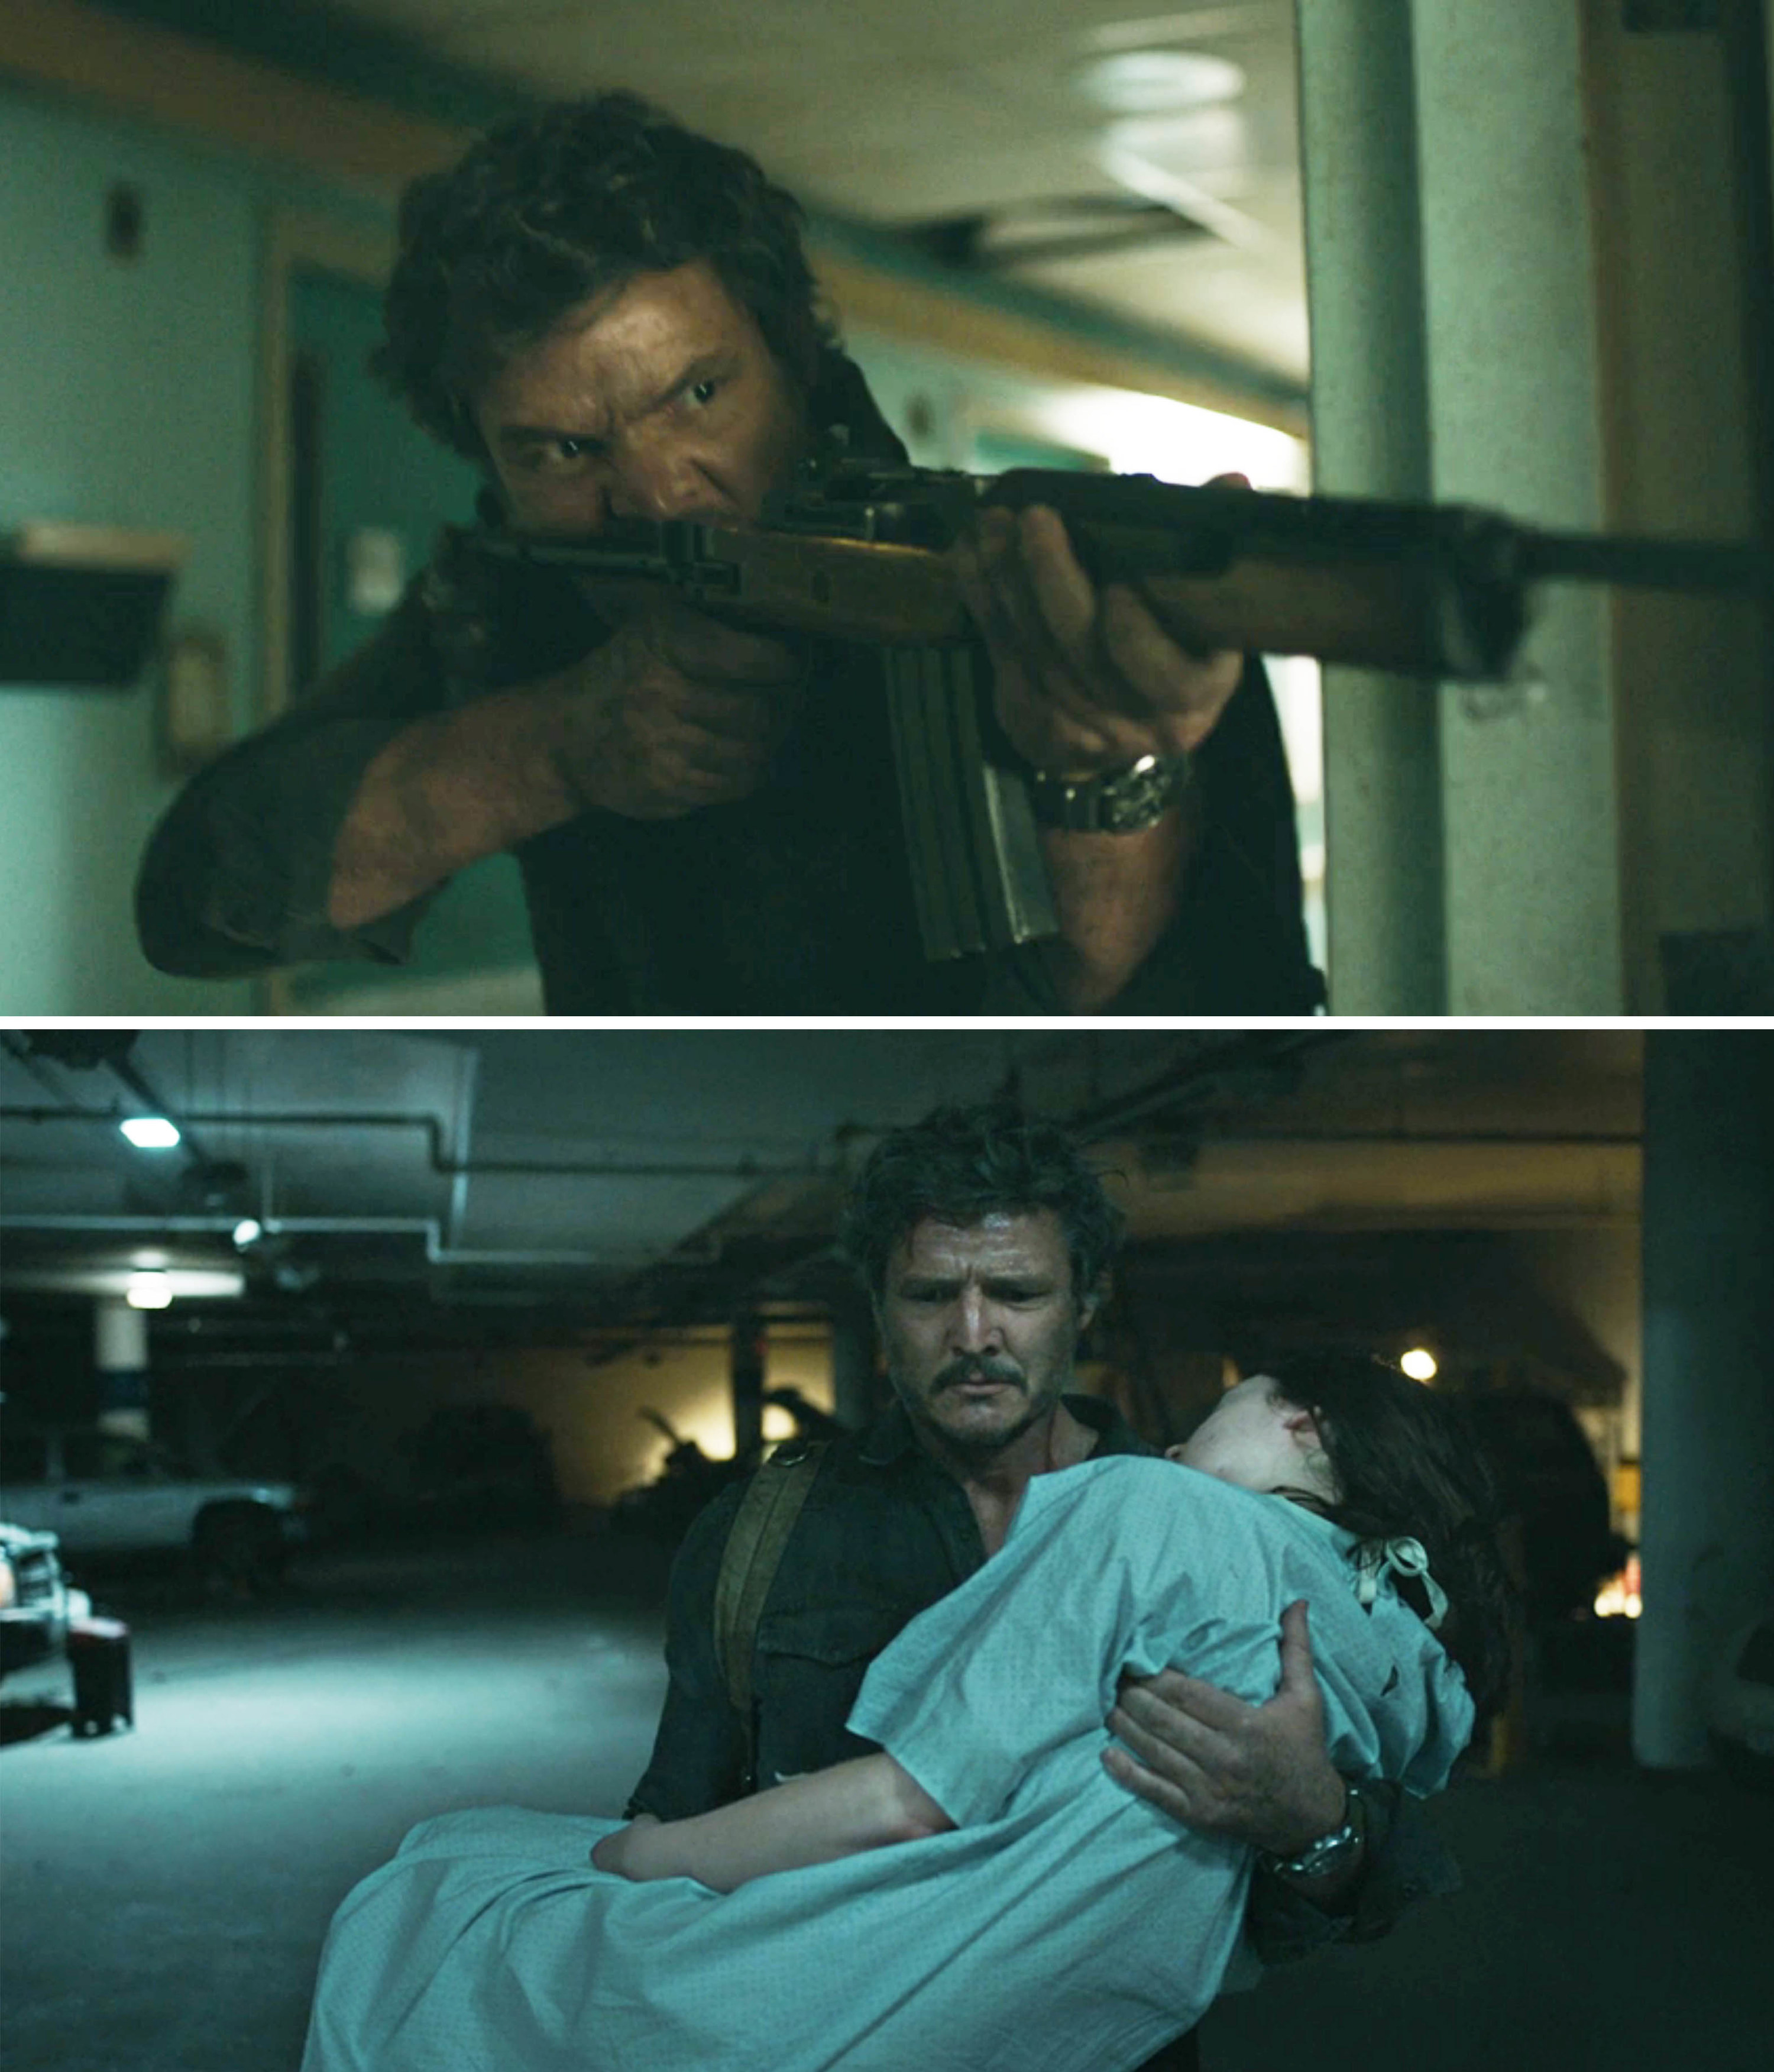 Joel pointing a rifle in the top image and Joel carrying Ellie in the bottom image